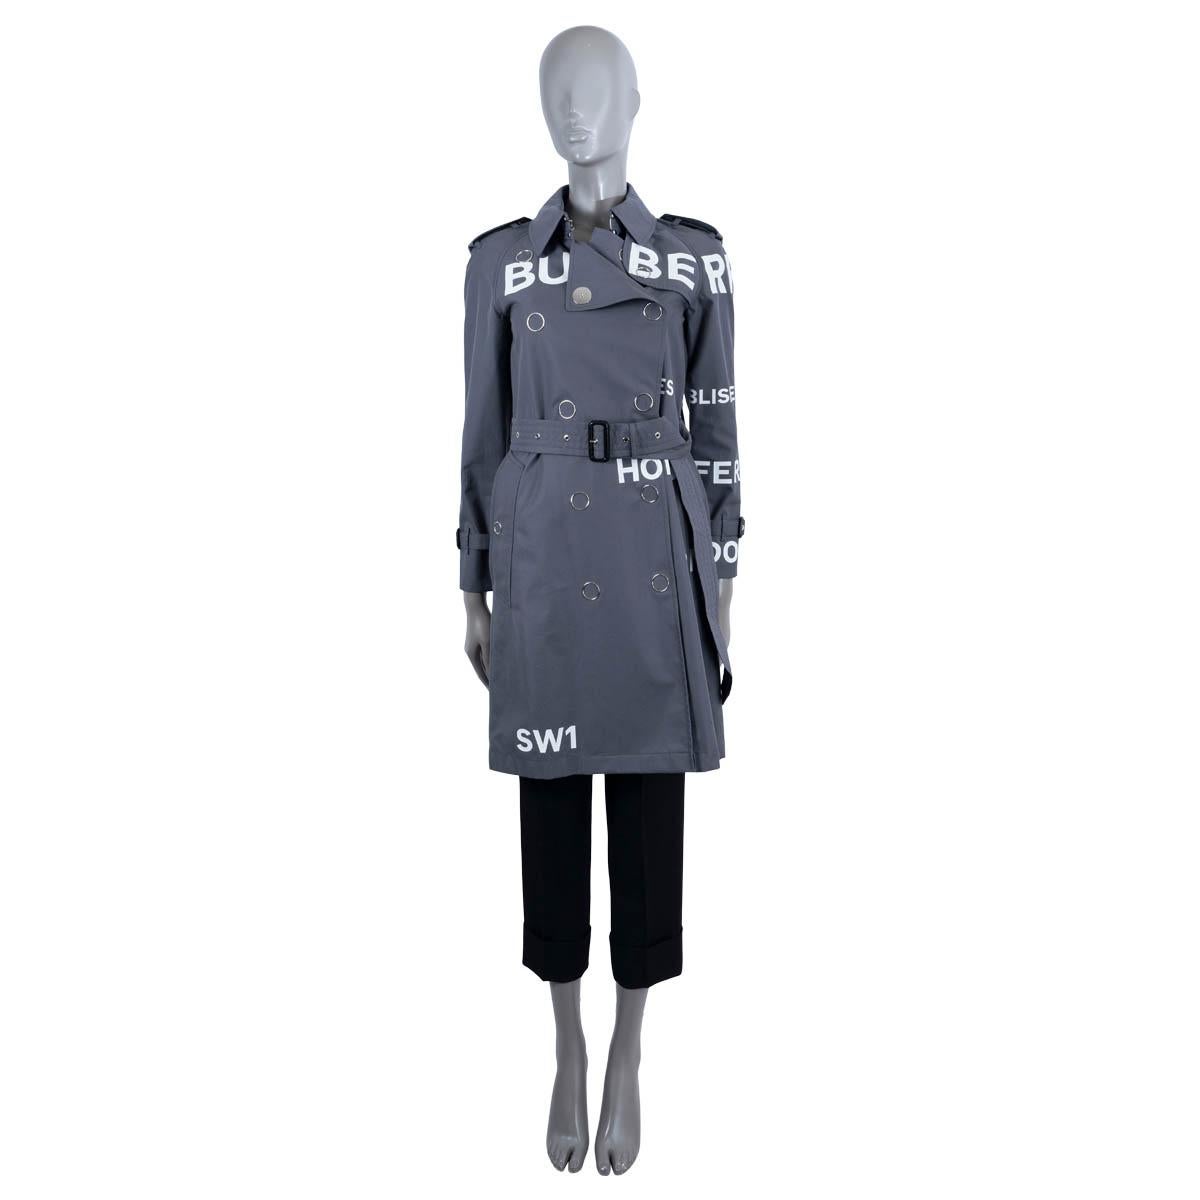 100% authentic Burberry Wharfbridge trench coat in grey cotton (100%) with horseferry print in white. Features epaulettes on the shoulders and cuffs.  Closes on the front with silver tone push buttons and a matching belt. Lined in cotton (100%). Has